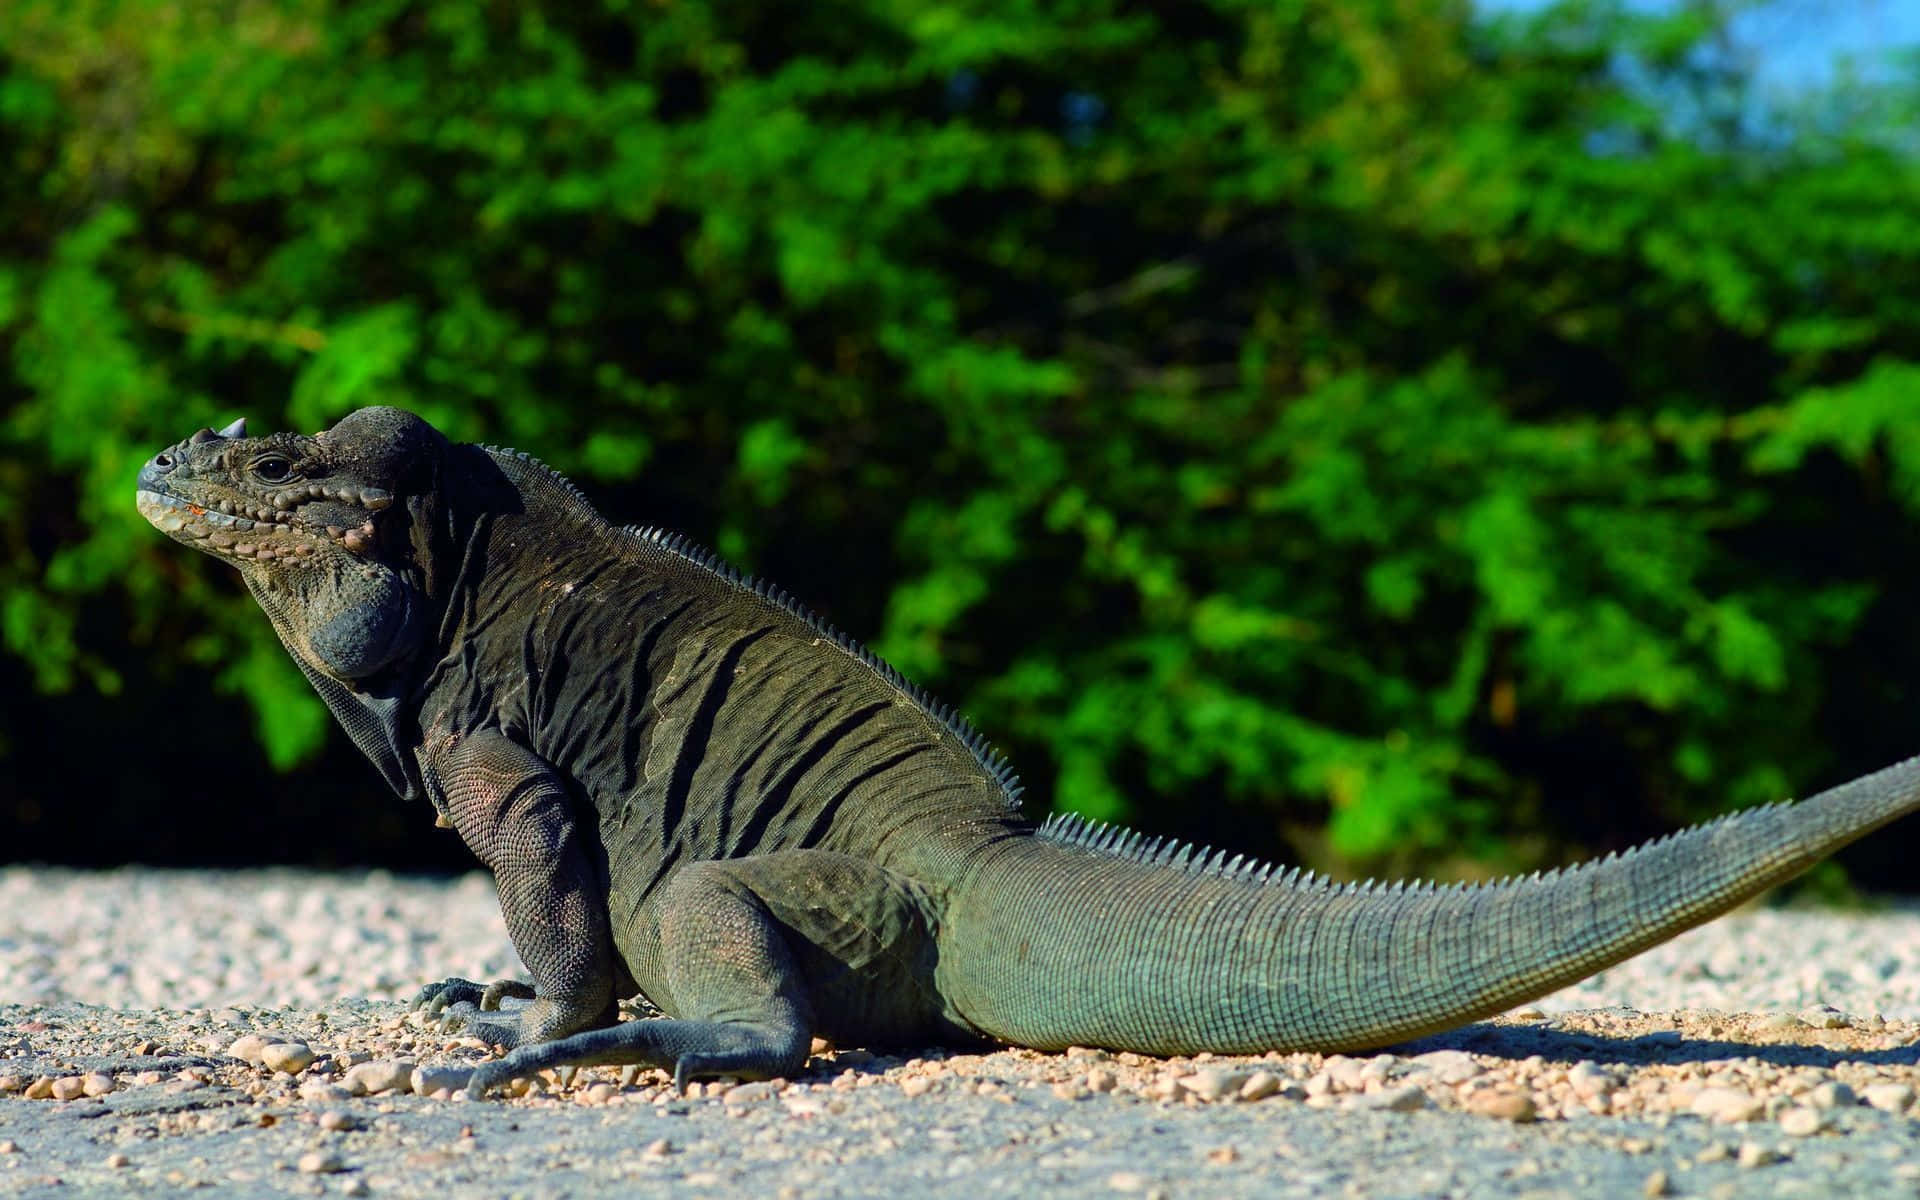 A Large Iguana Is Sitting On The Ground